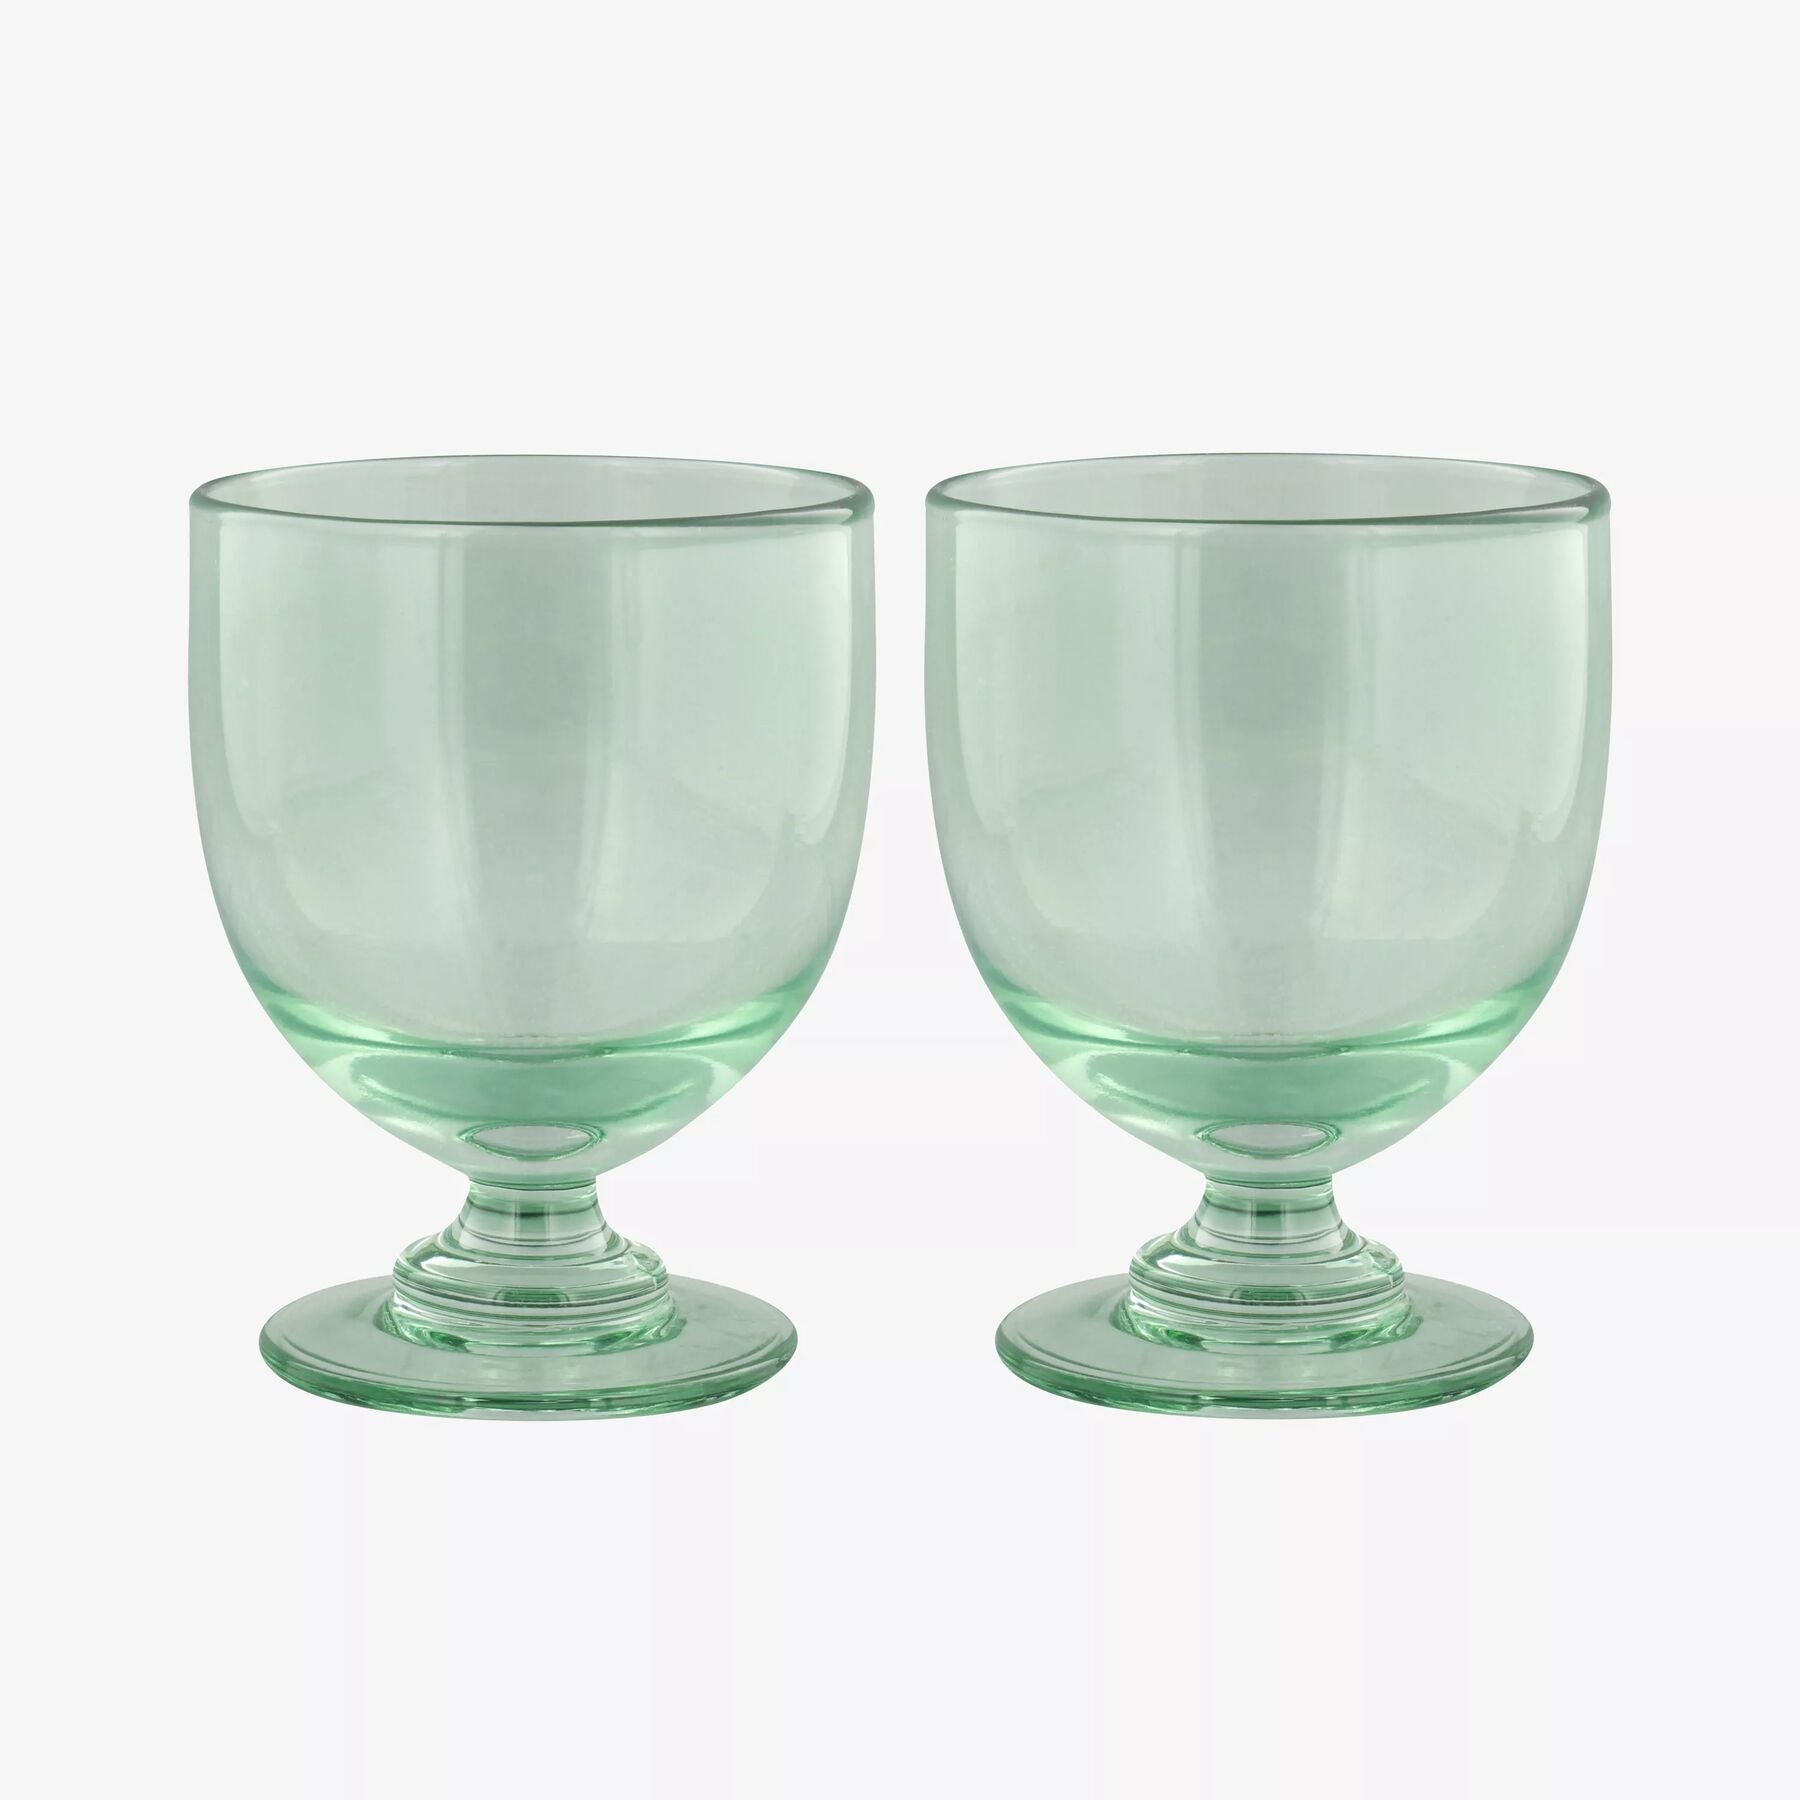 Emma Bridgewater |  Goblet Wine Glasses - 100% Recycled Glass (Set of 2) - Unique Hand-Etched Piece